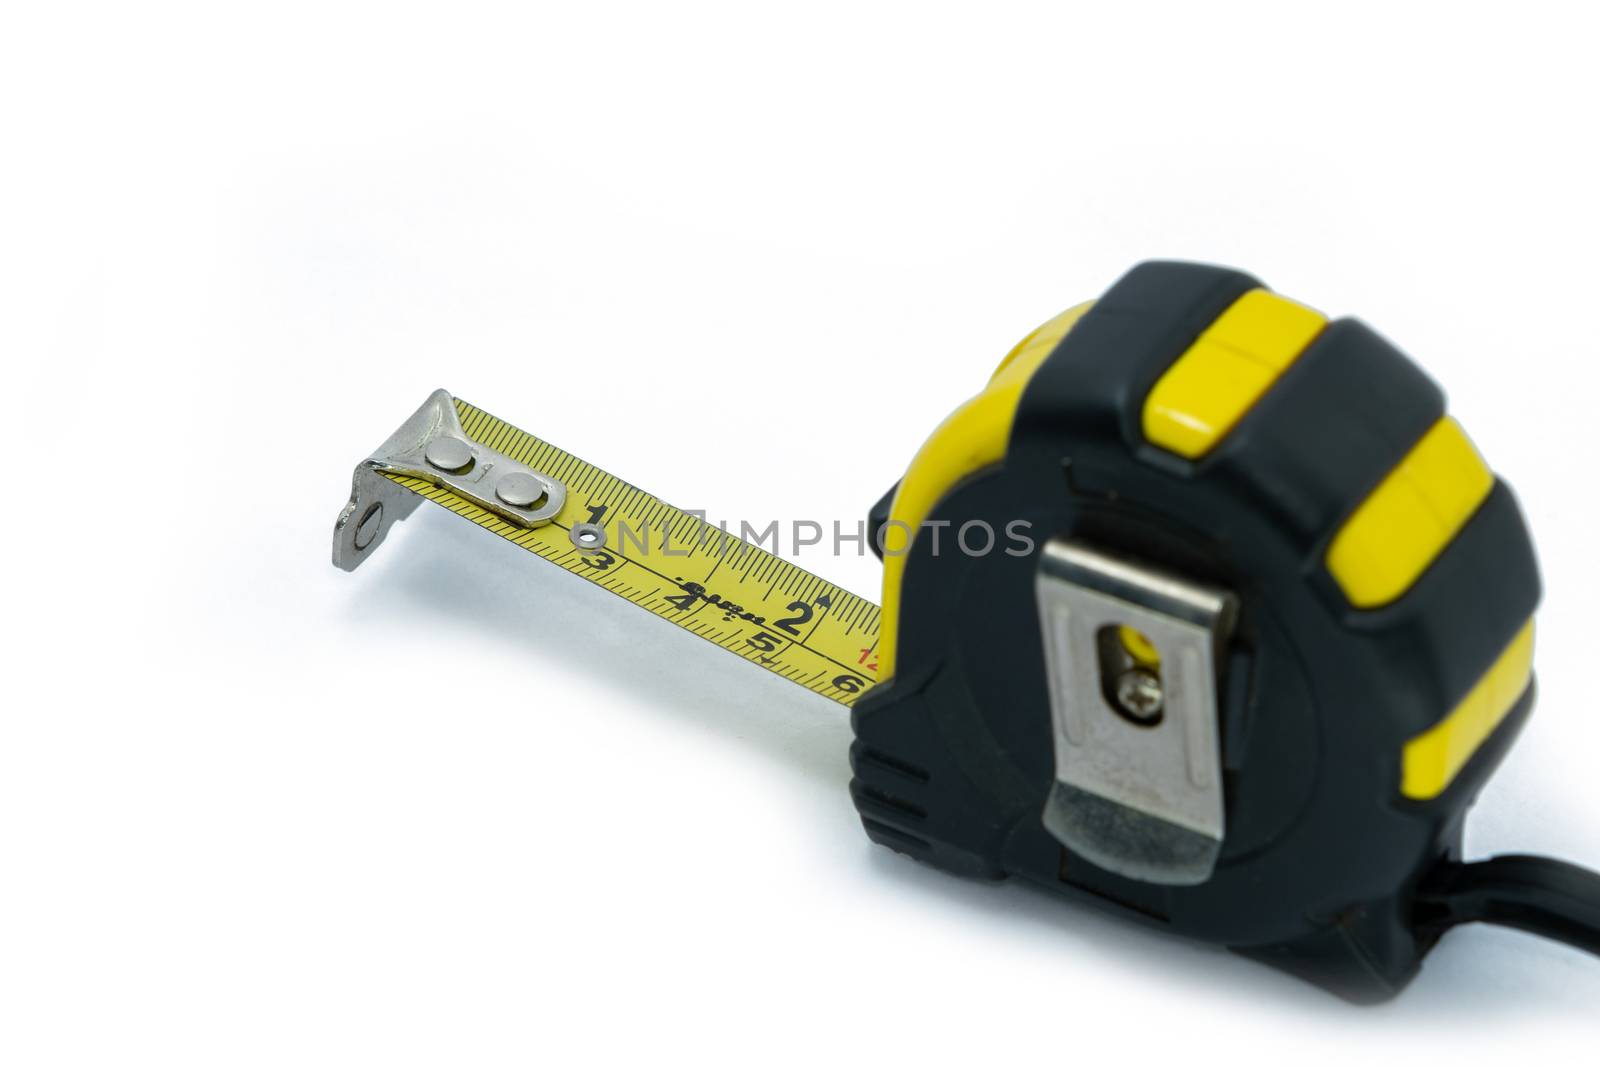 The retractable yellow metal measuring tape isolated on a white background. Measurements expressed in centimeters and feet. Construction measuring instrument